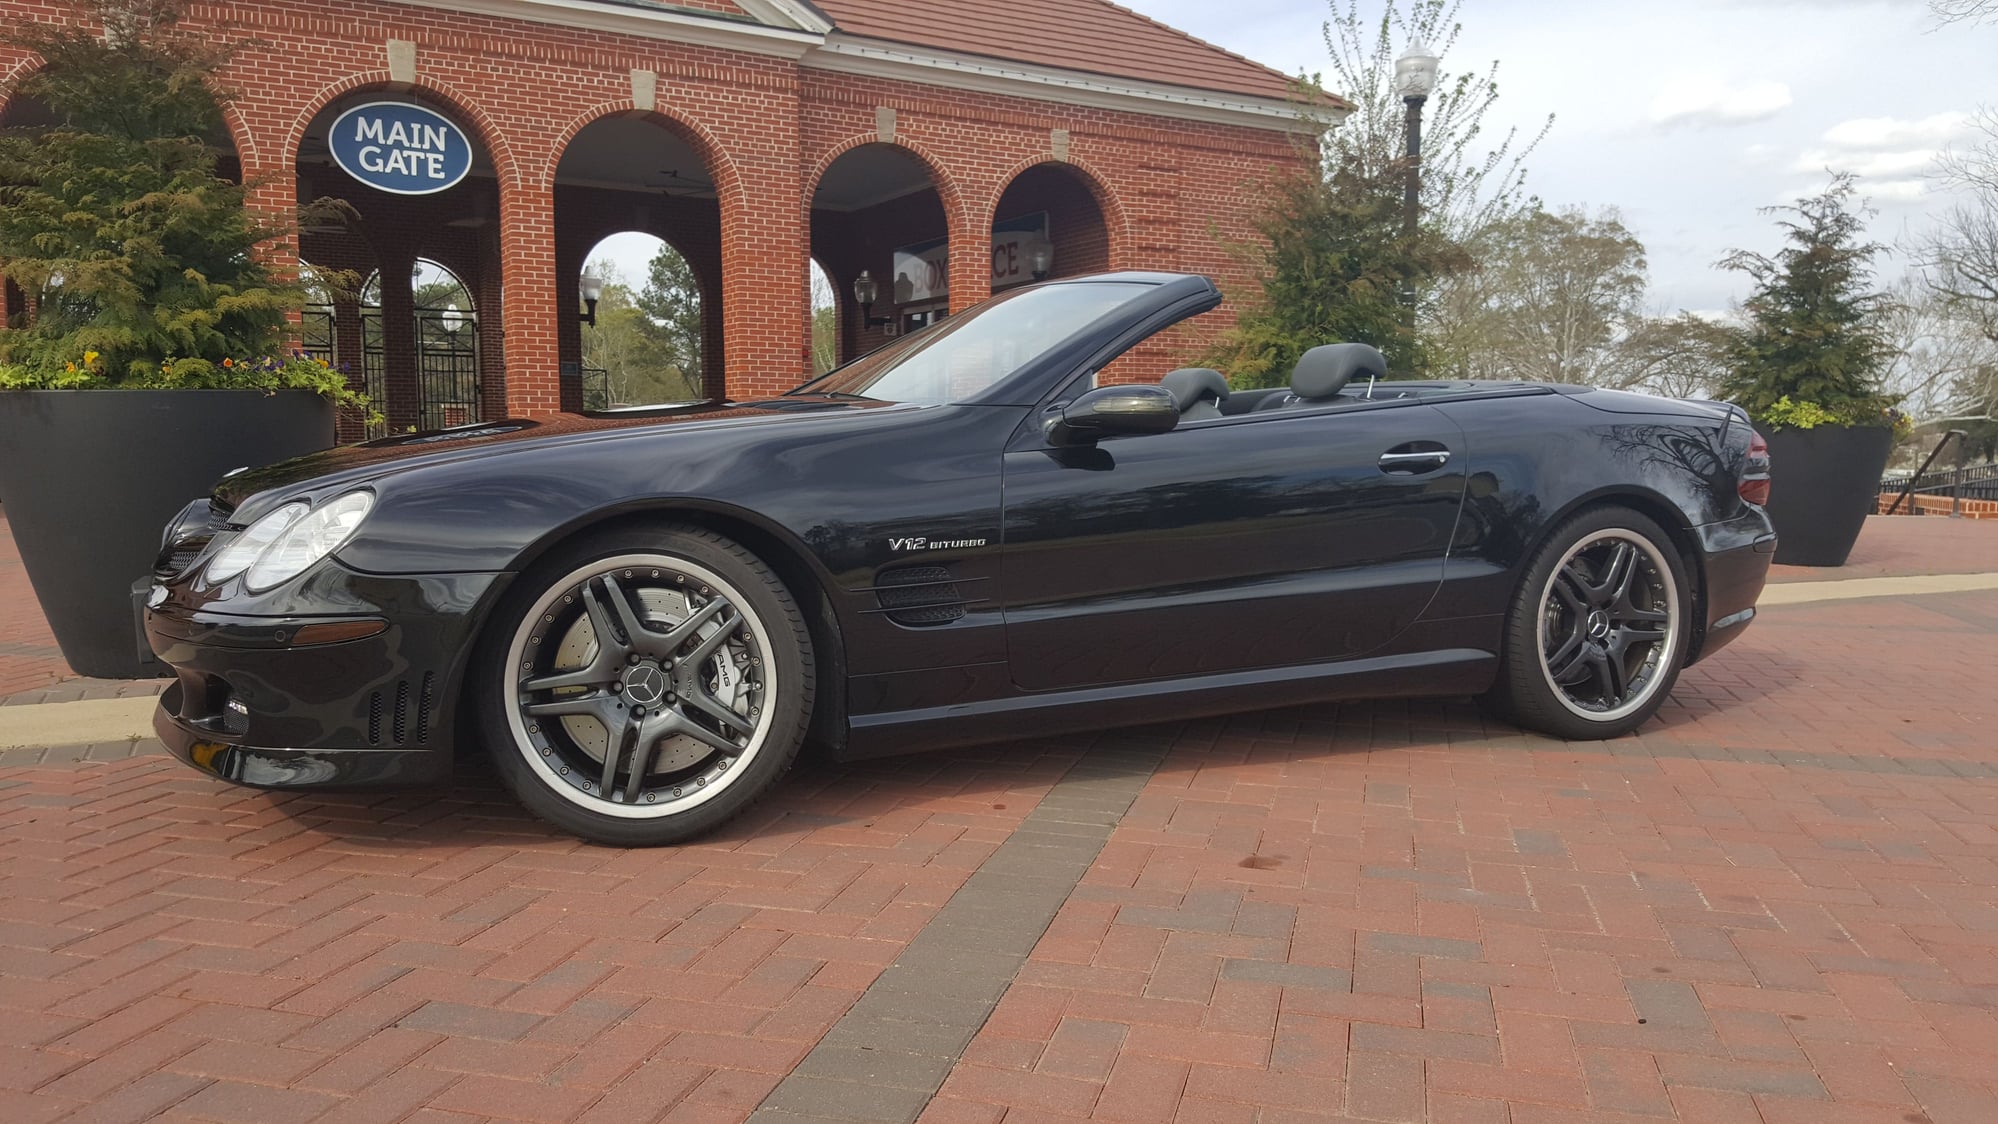 2006 Mercedes-Benz SL65 AMG - Super nice, low mile SL65 AMG - Used - VIN WDBSK79F06F109503 - 32,664 Miles - 12 cyl - 2WD - Automatic - Convertible - Black - Lagrange, GA 30240, United States